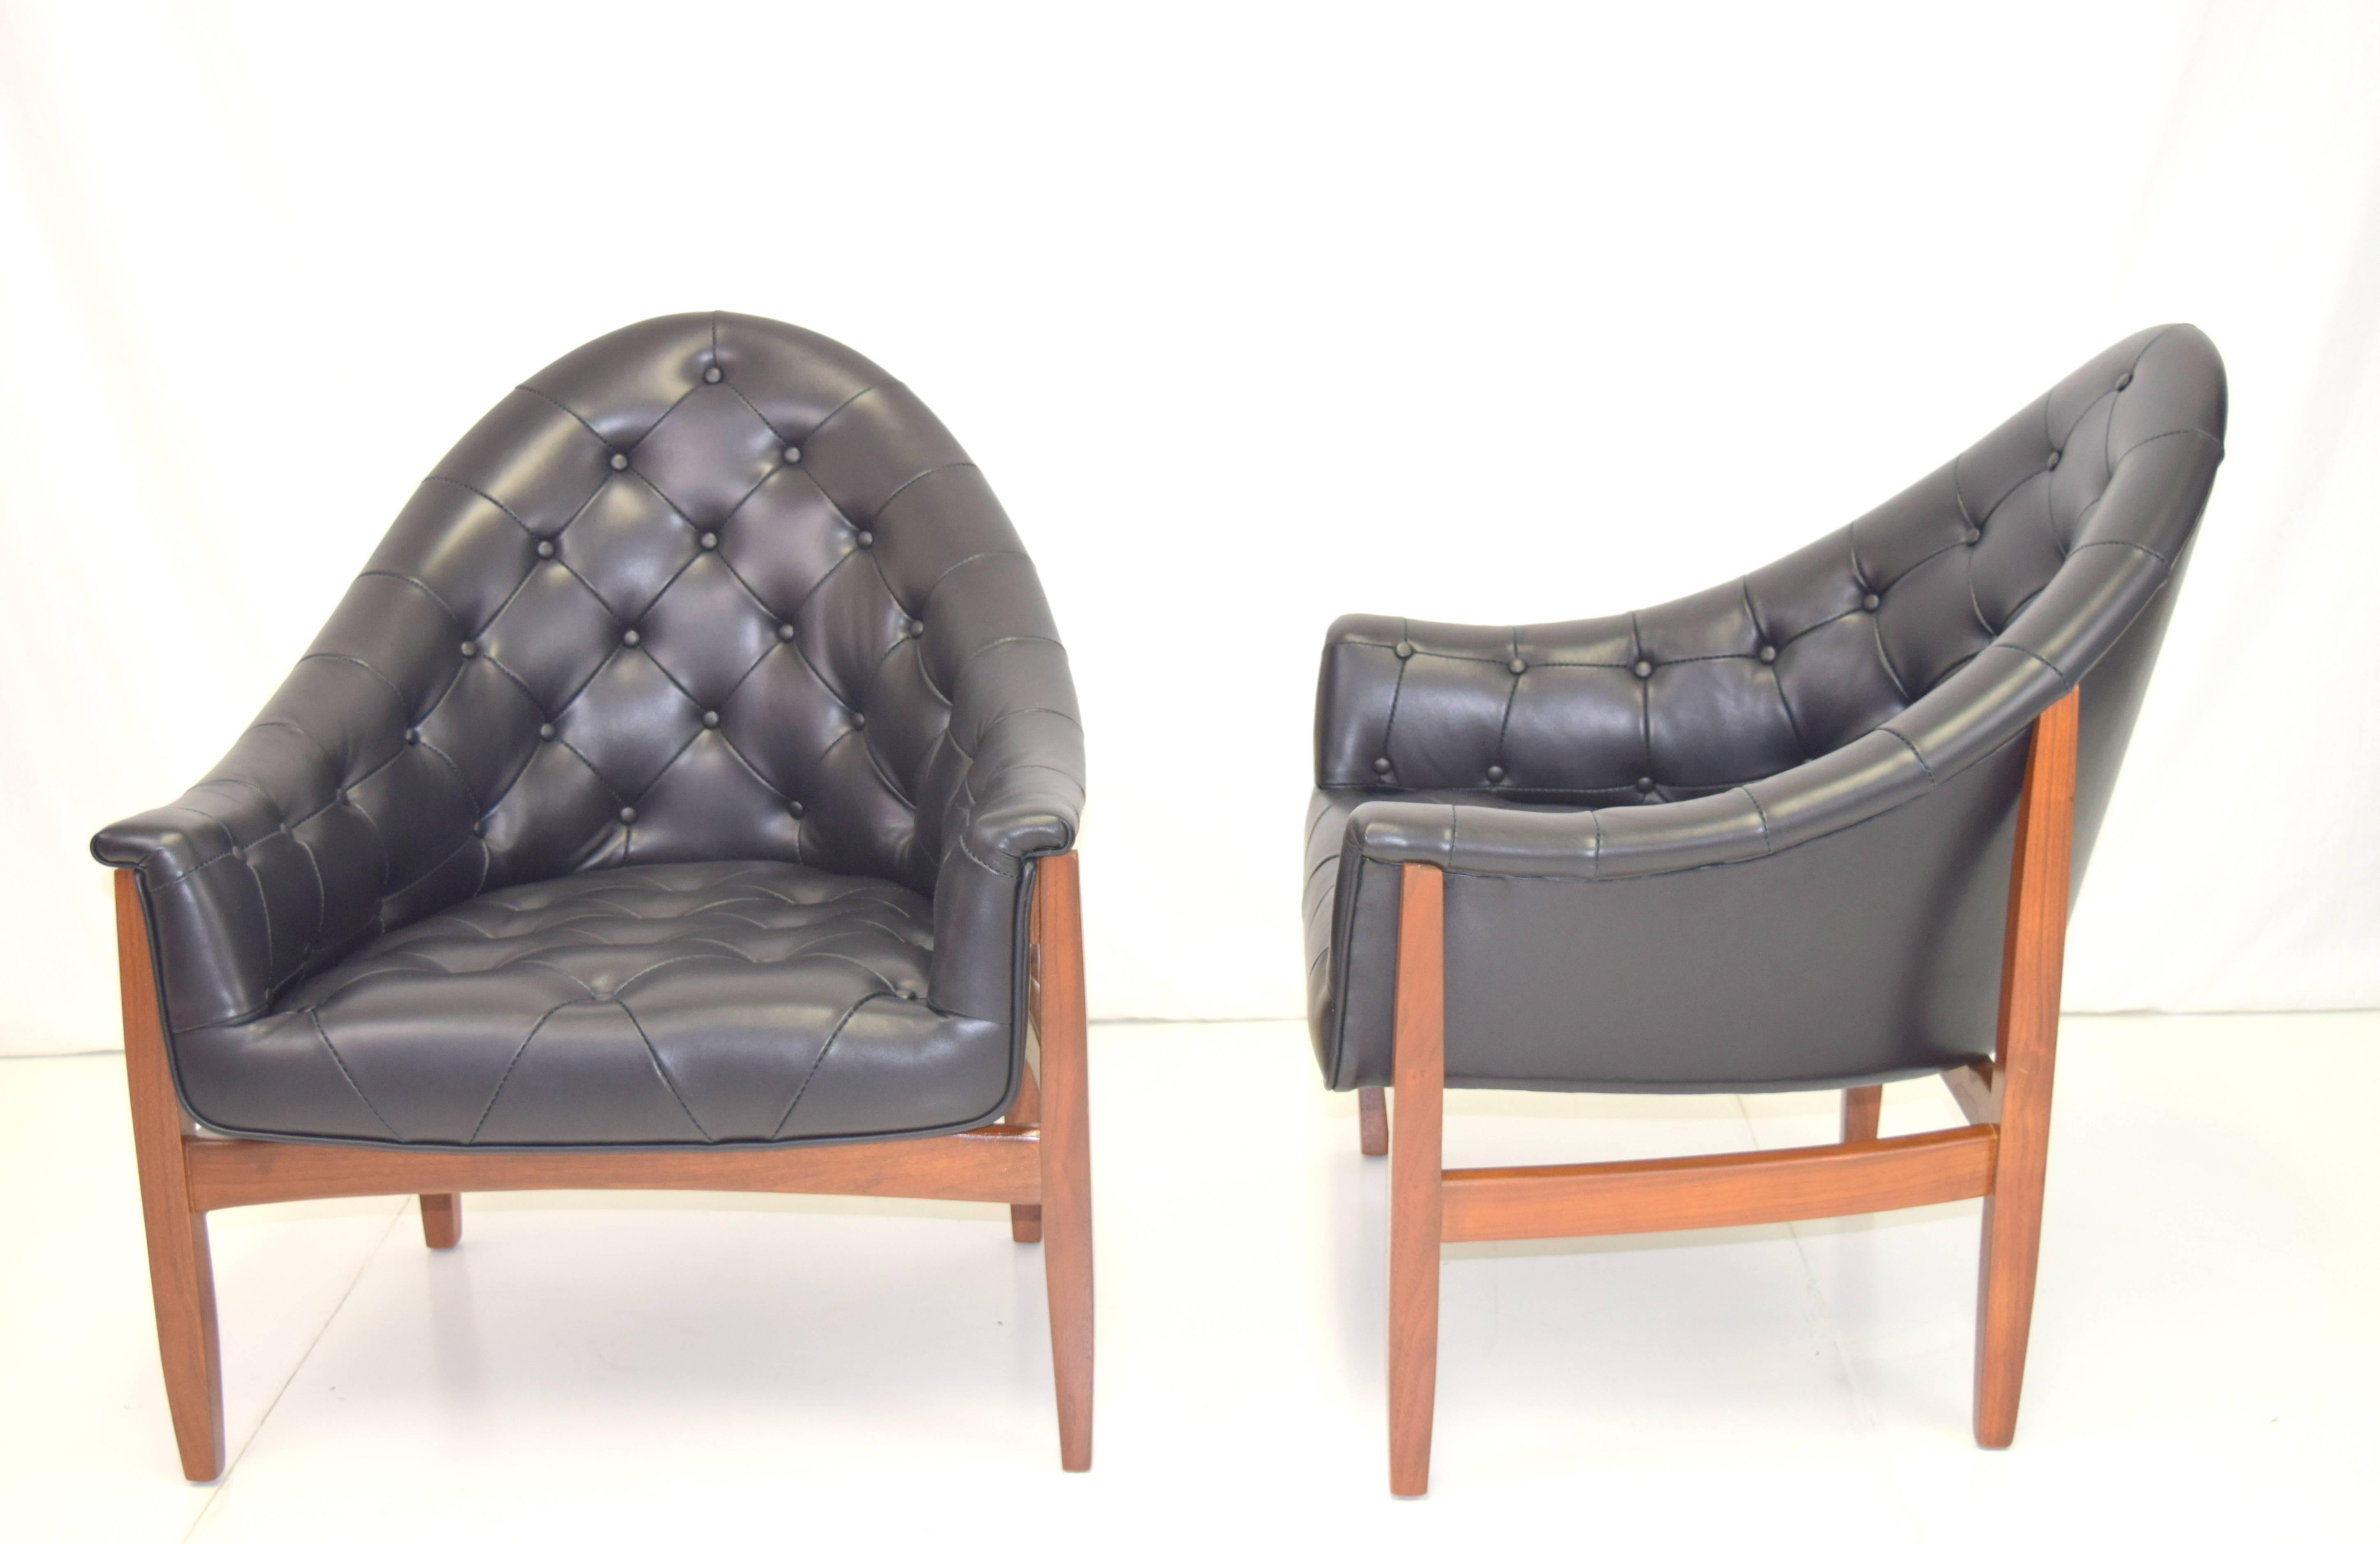 Rare pair of walnut framed tufted chairs by Milo Baughman. Professionally rebuilt and upholstered in black leather and refinished walnut frames. Sexy silhouettes and scale.